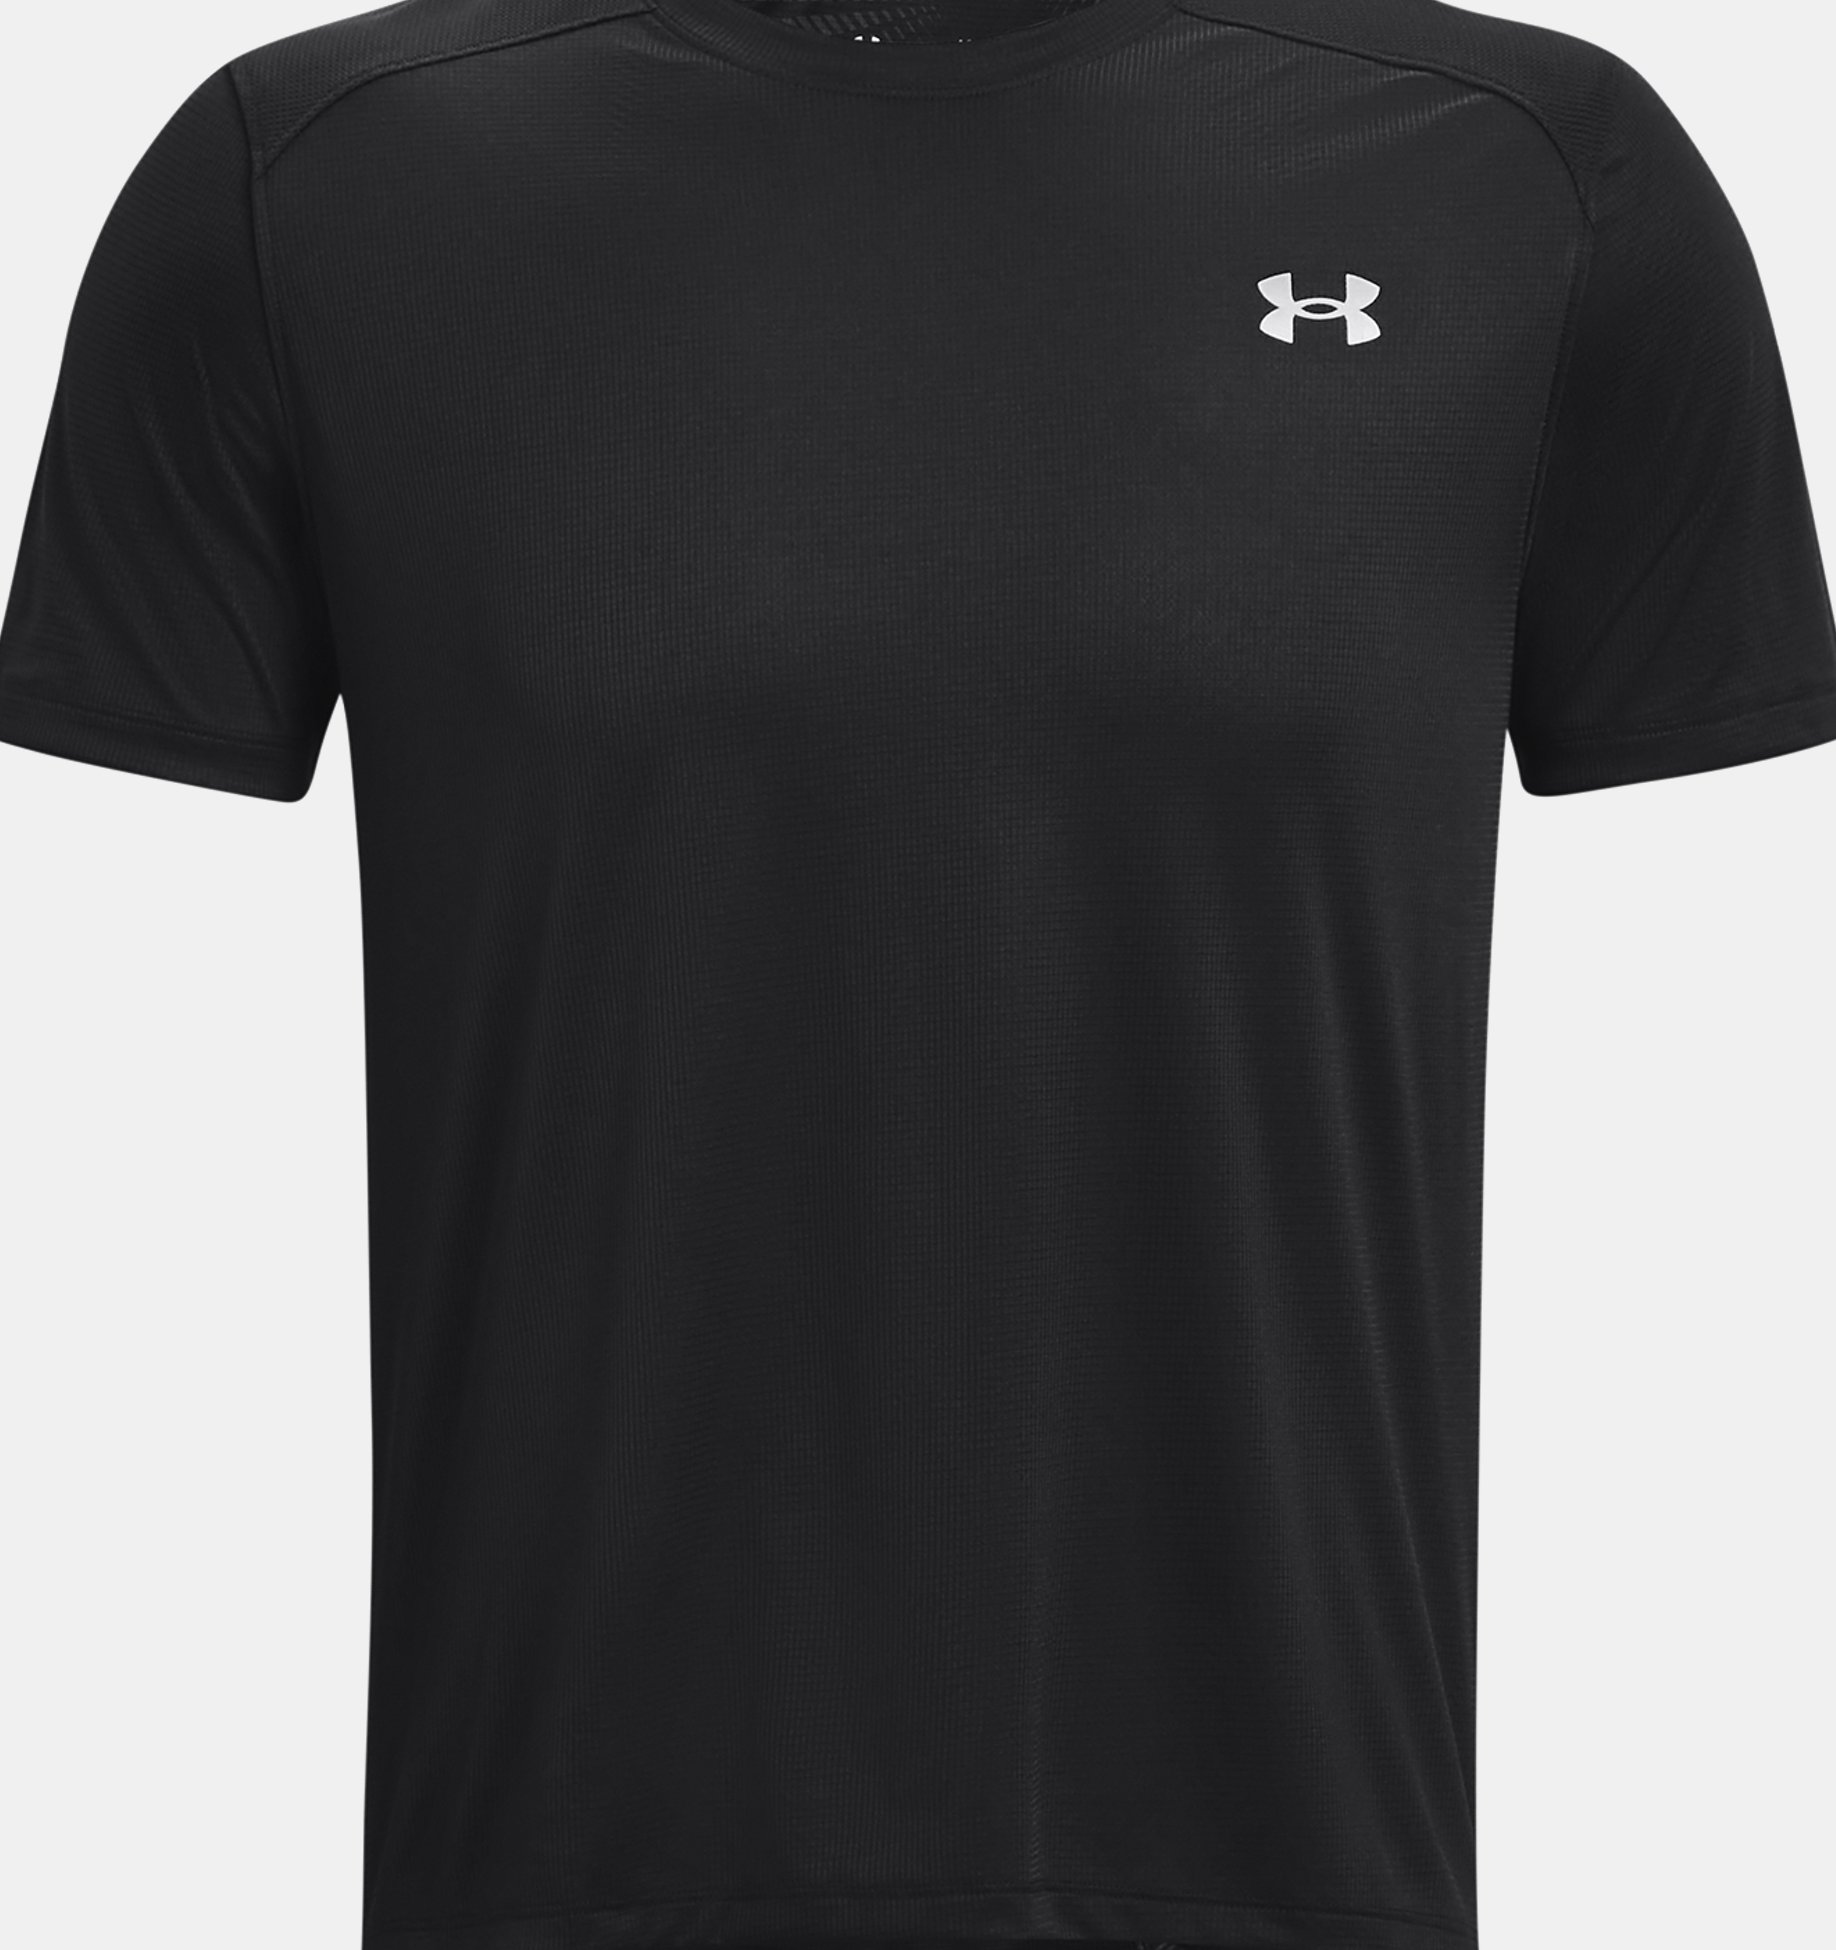 Men's UA CoolSwitch Sleeve Under Armour